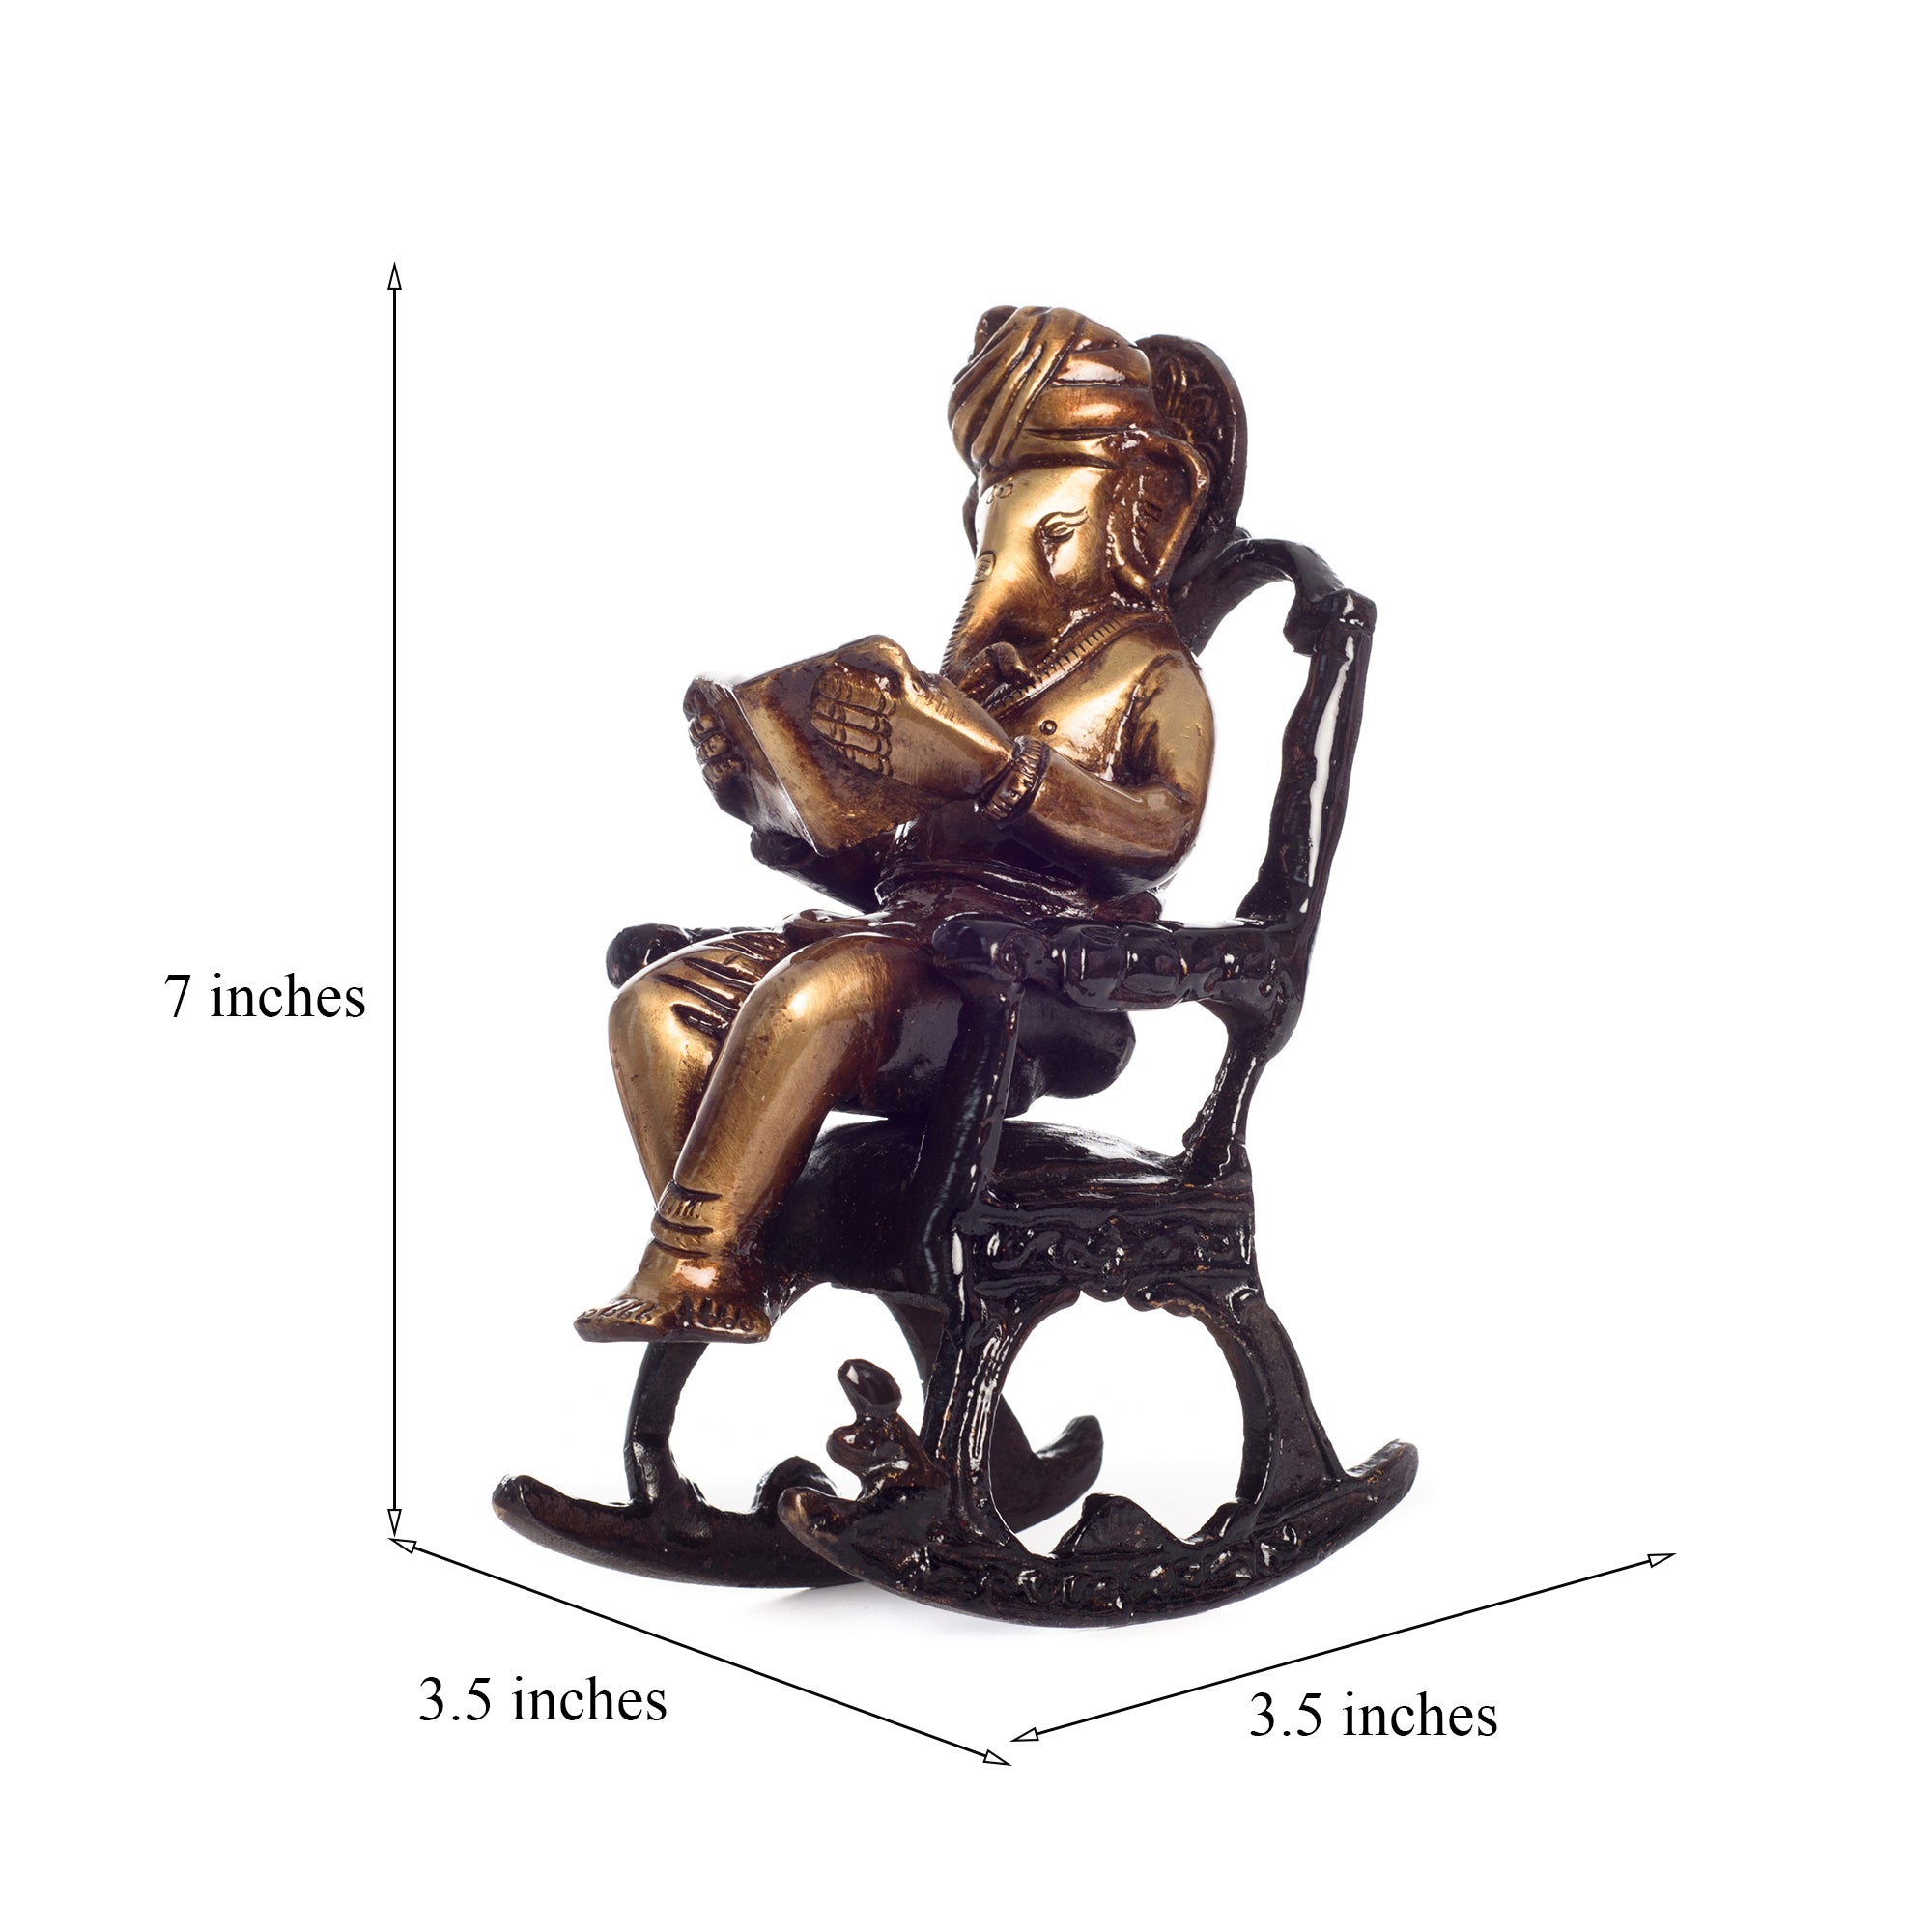 Designer Pearl Rakhi with Brass Lord Ganesha on Rocking Chair Antique Showpiece and Roli Chawal Pack, Best Wishes Greeting Card 2